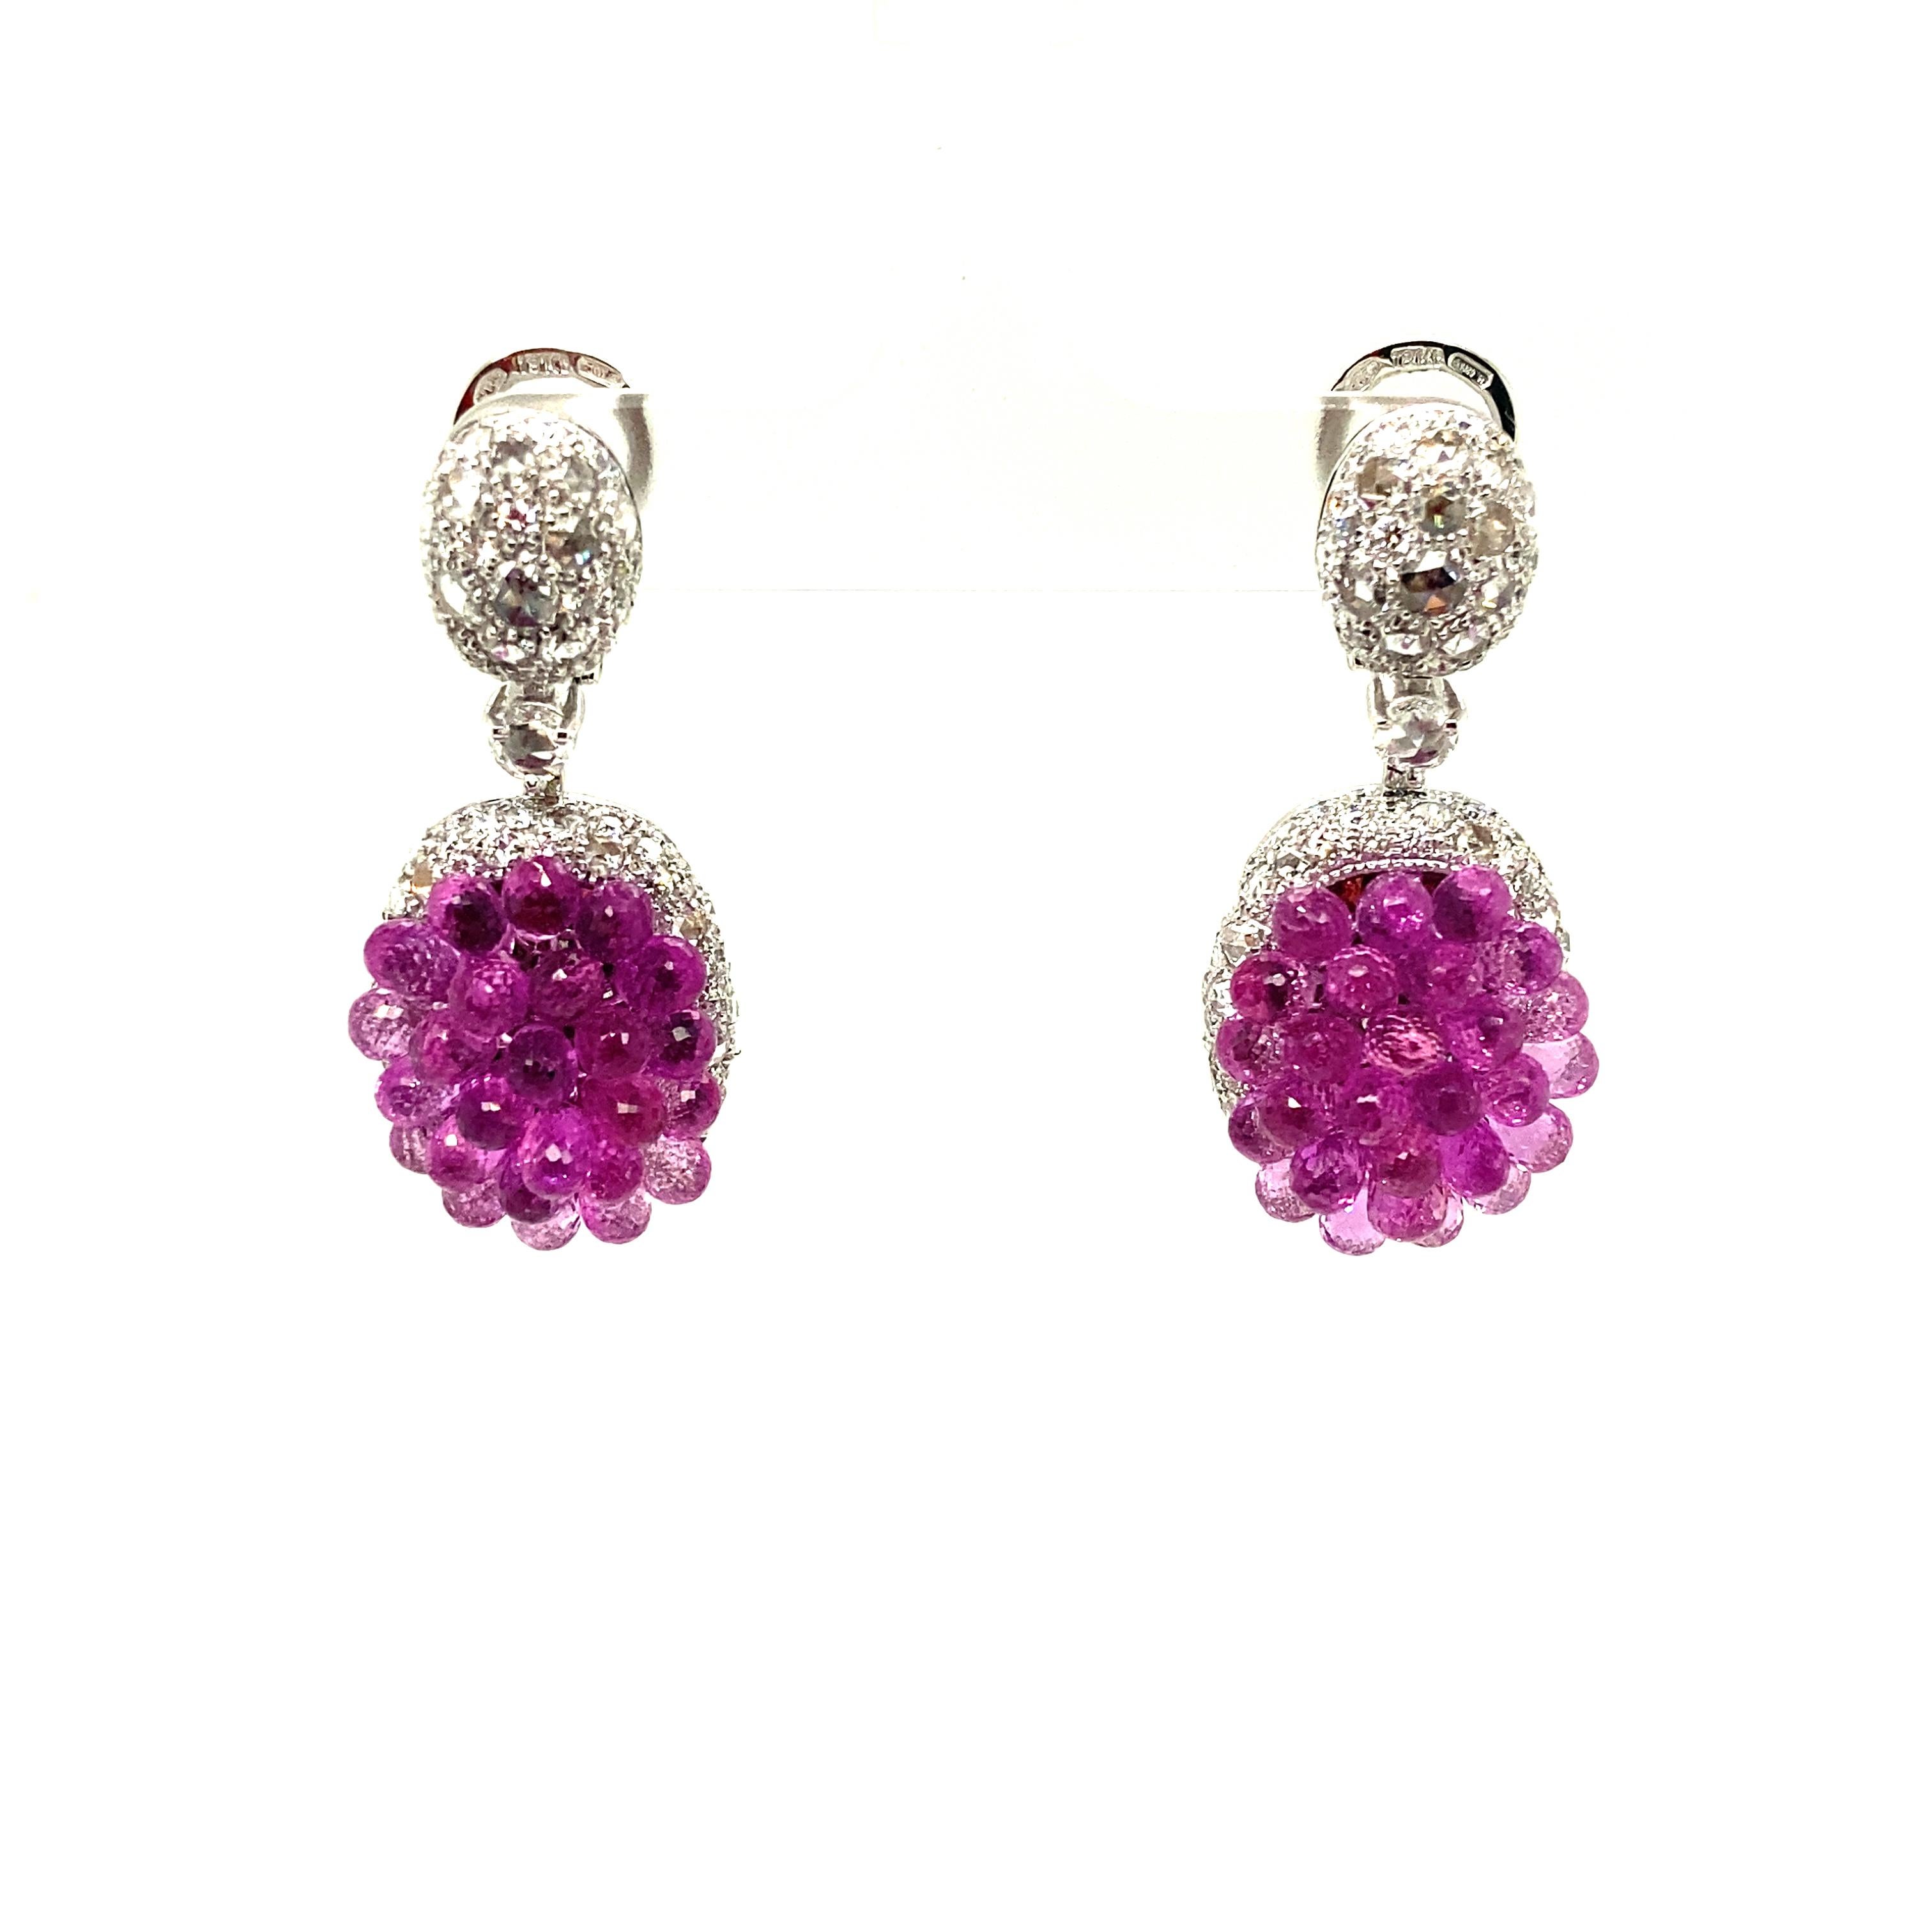 26 Carat Briolette-Cut Pink Sapphires and White Diamond Gold Dangle Earrings:

A beautiful pair of earrings, it features numerous briolette-cut pink sapphires weighing 26 carat surrounded and topped by white diamonds weighing 4.04 carat. The pink